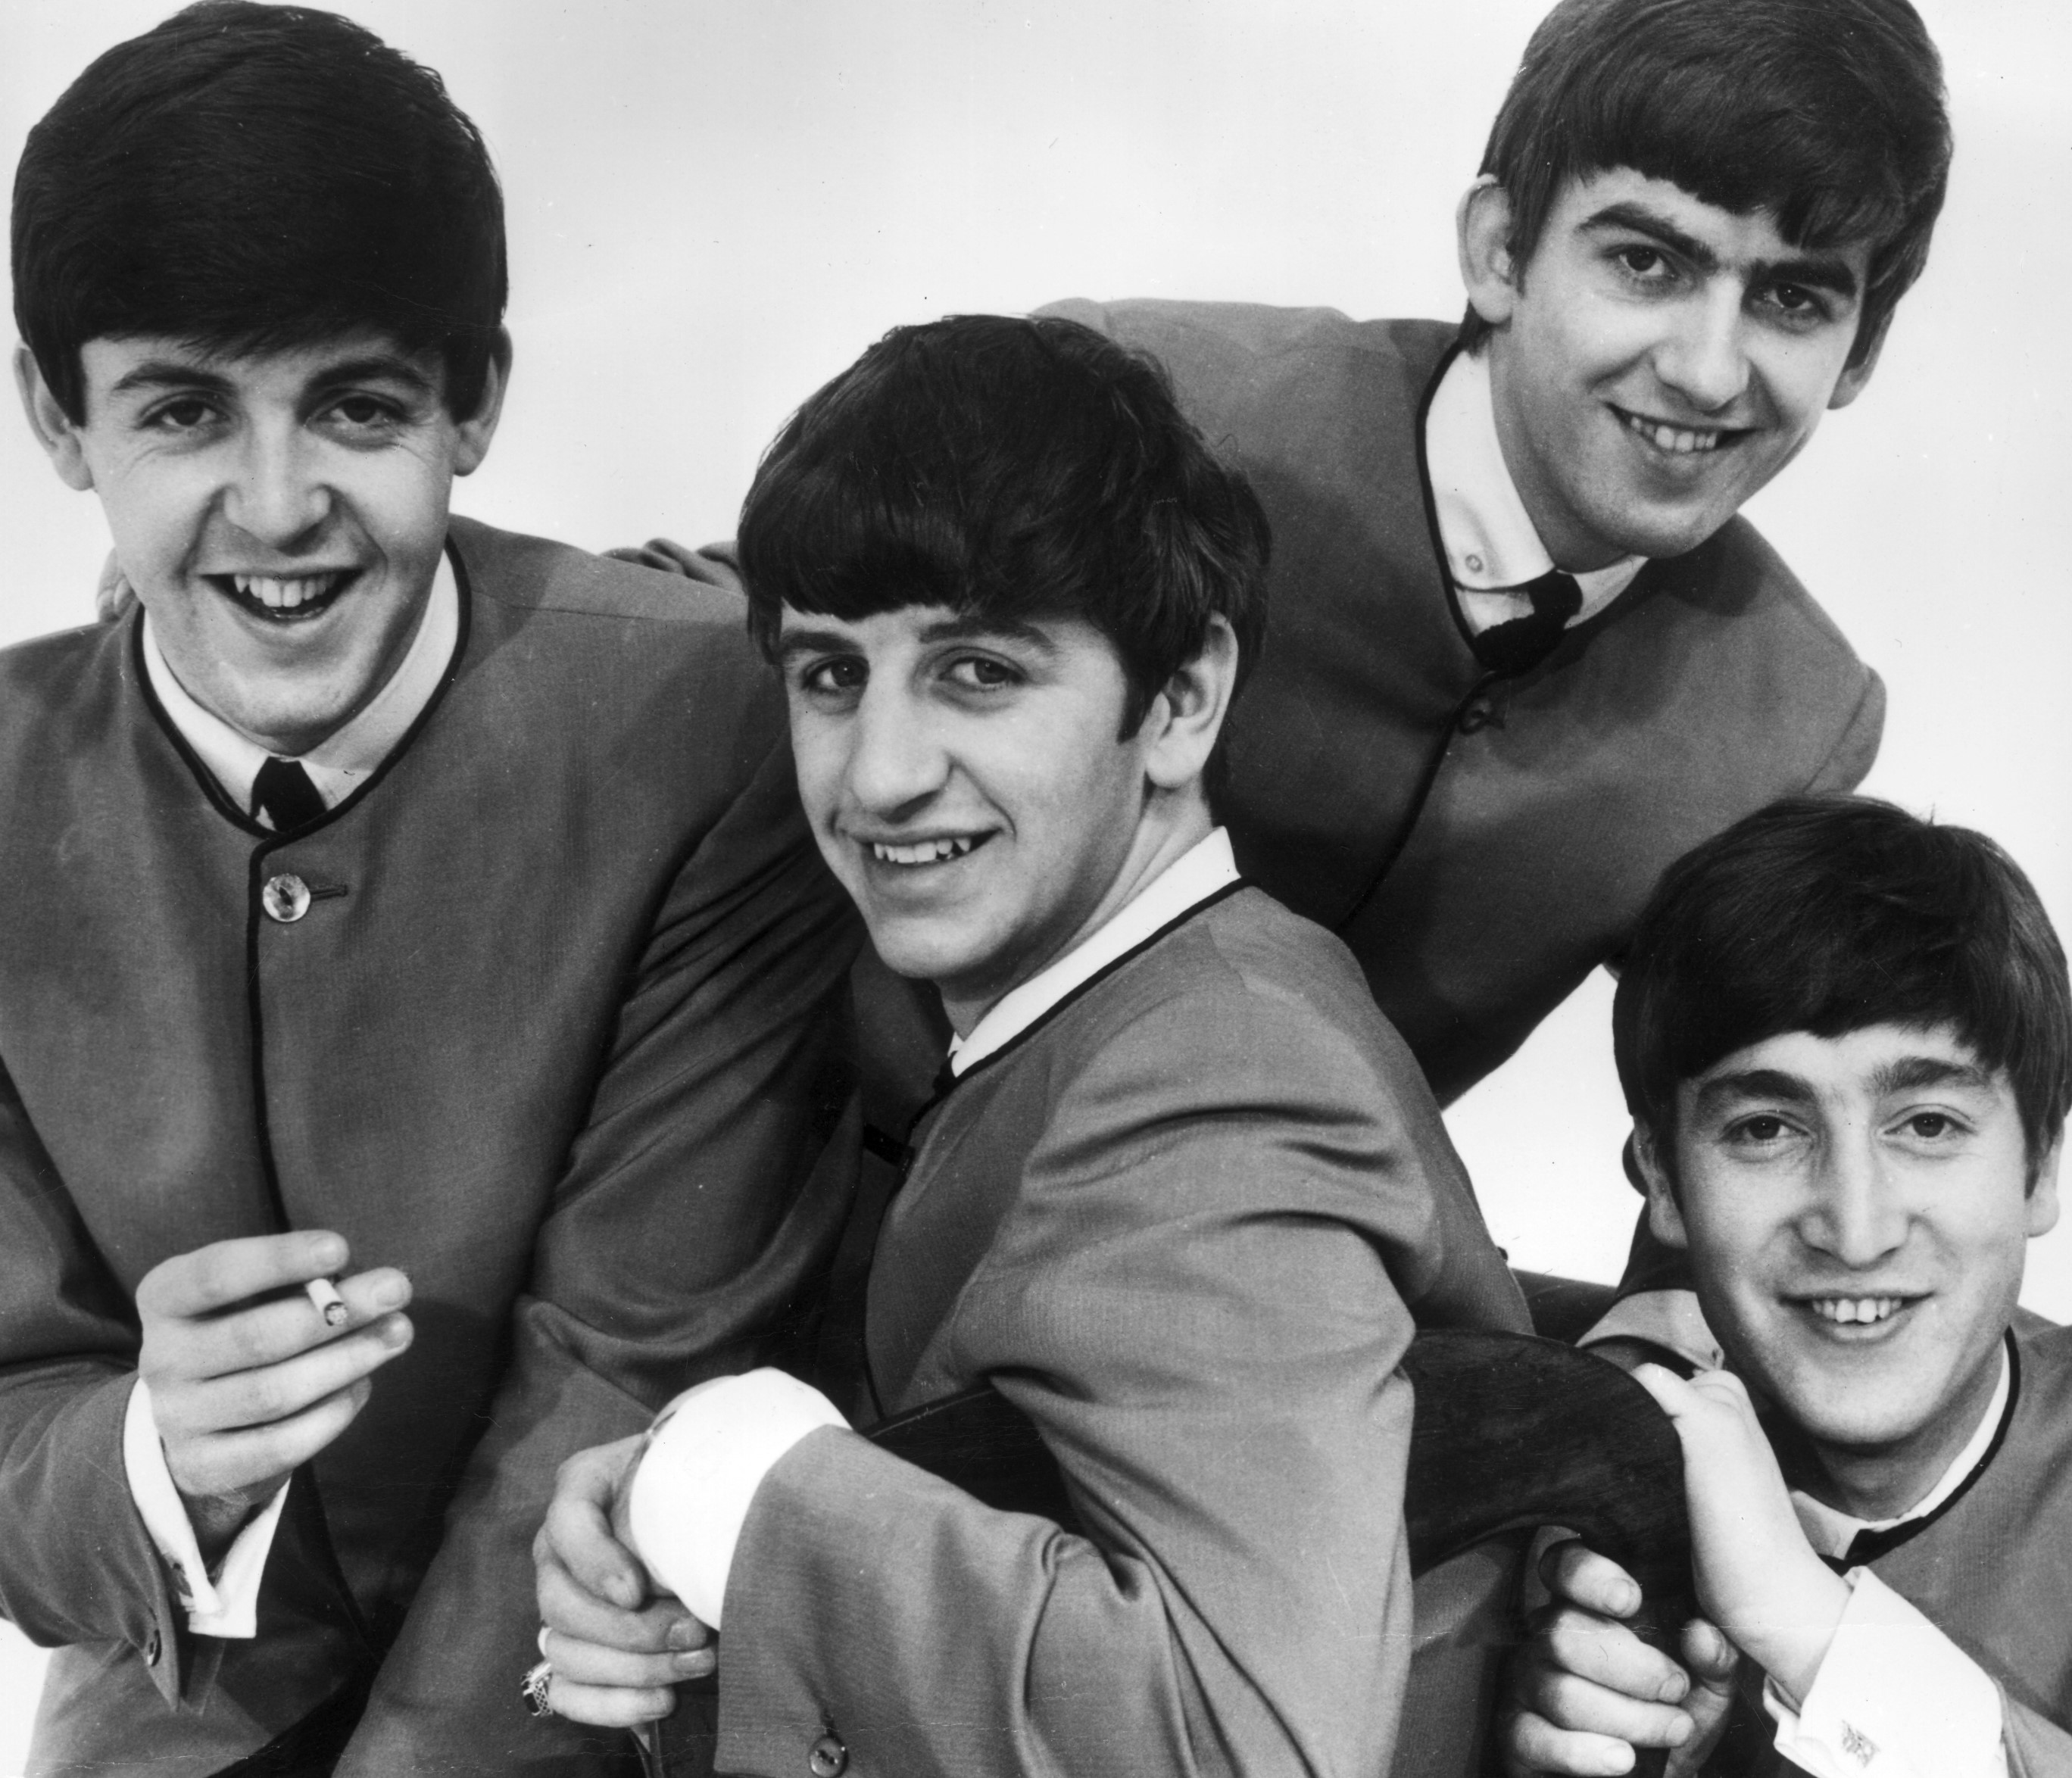 The Beatles with mop tops during the "I Want to Hold Your Hand" era